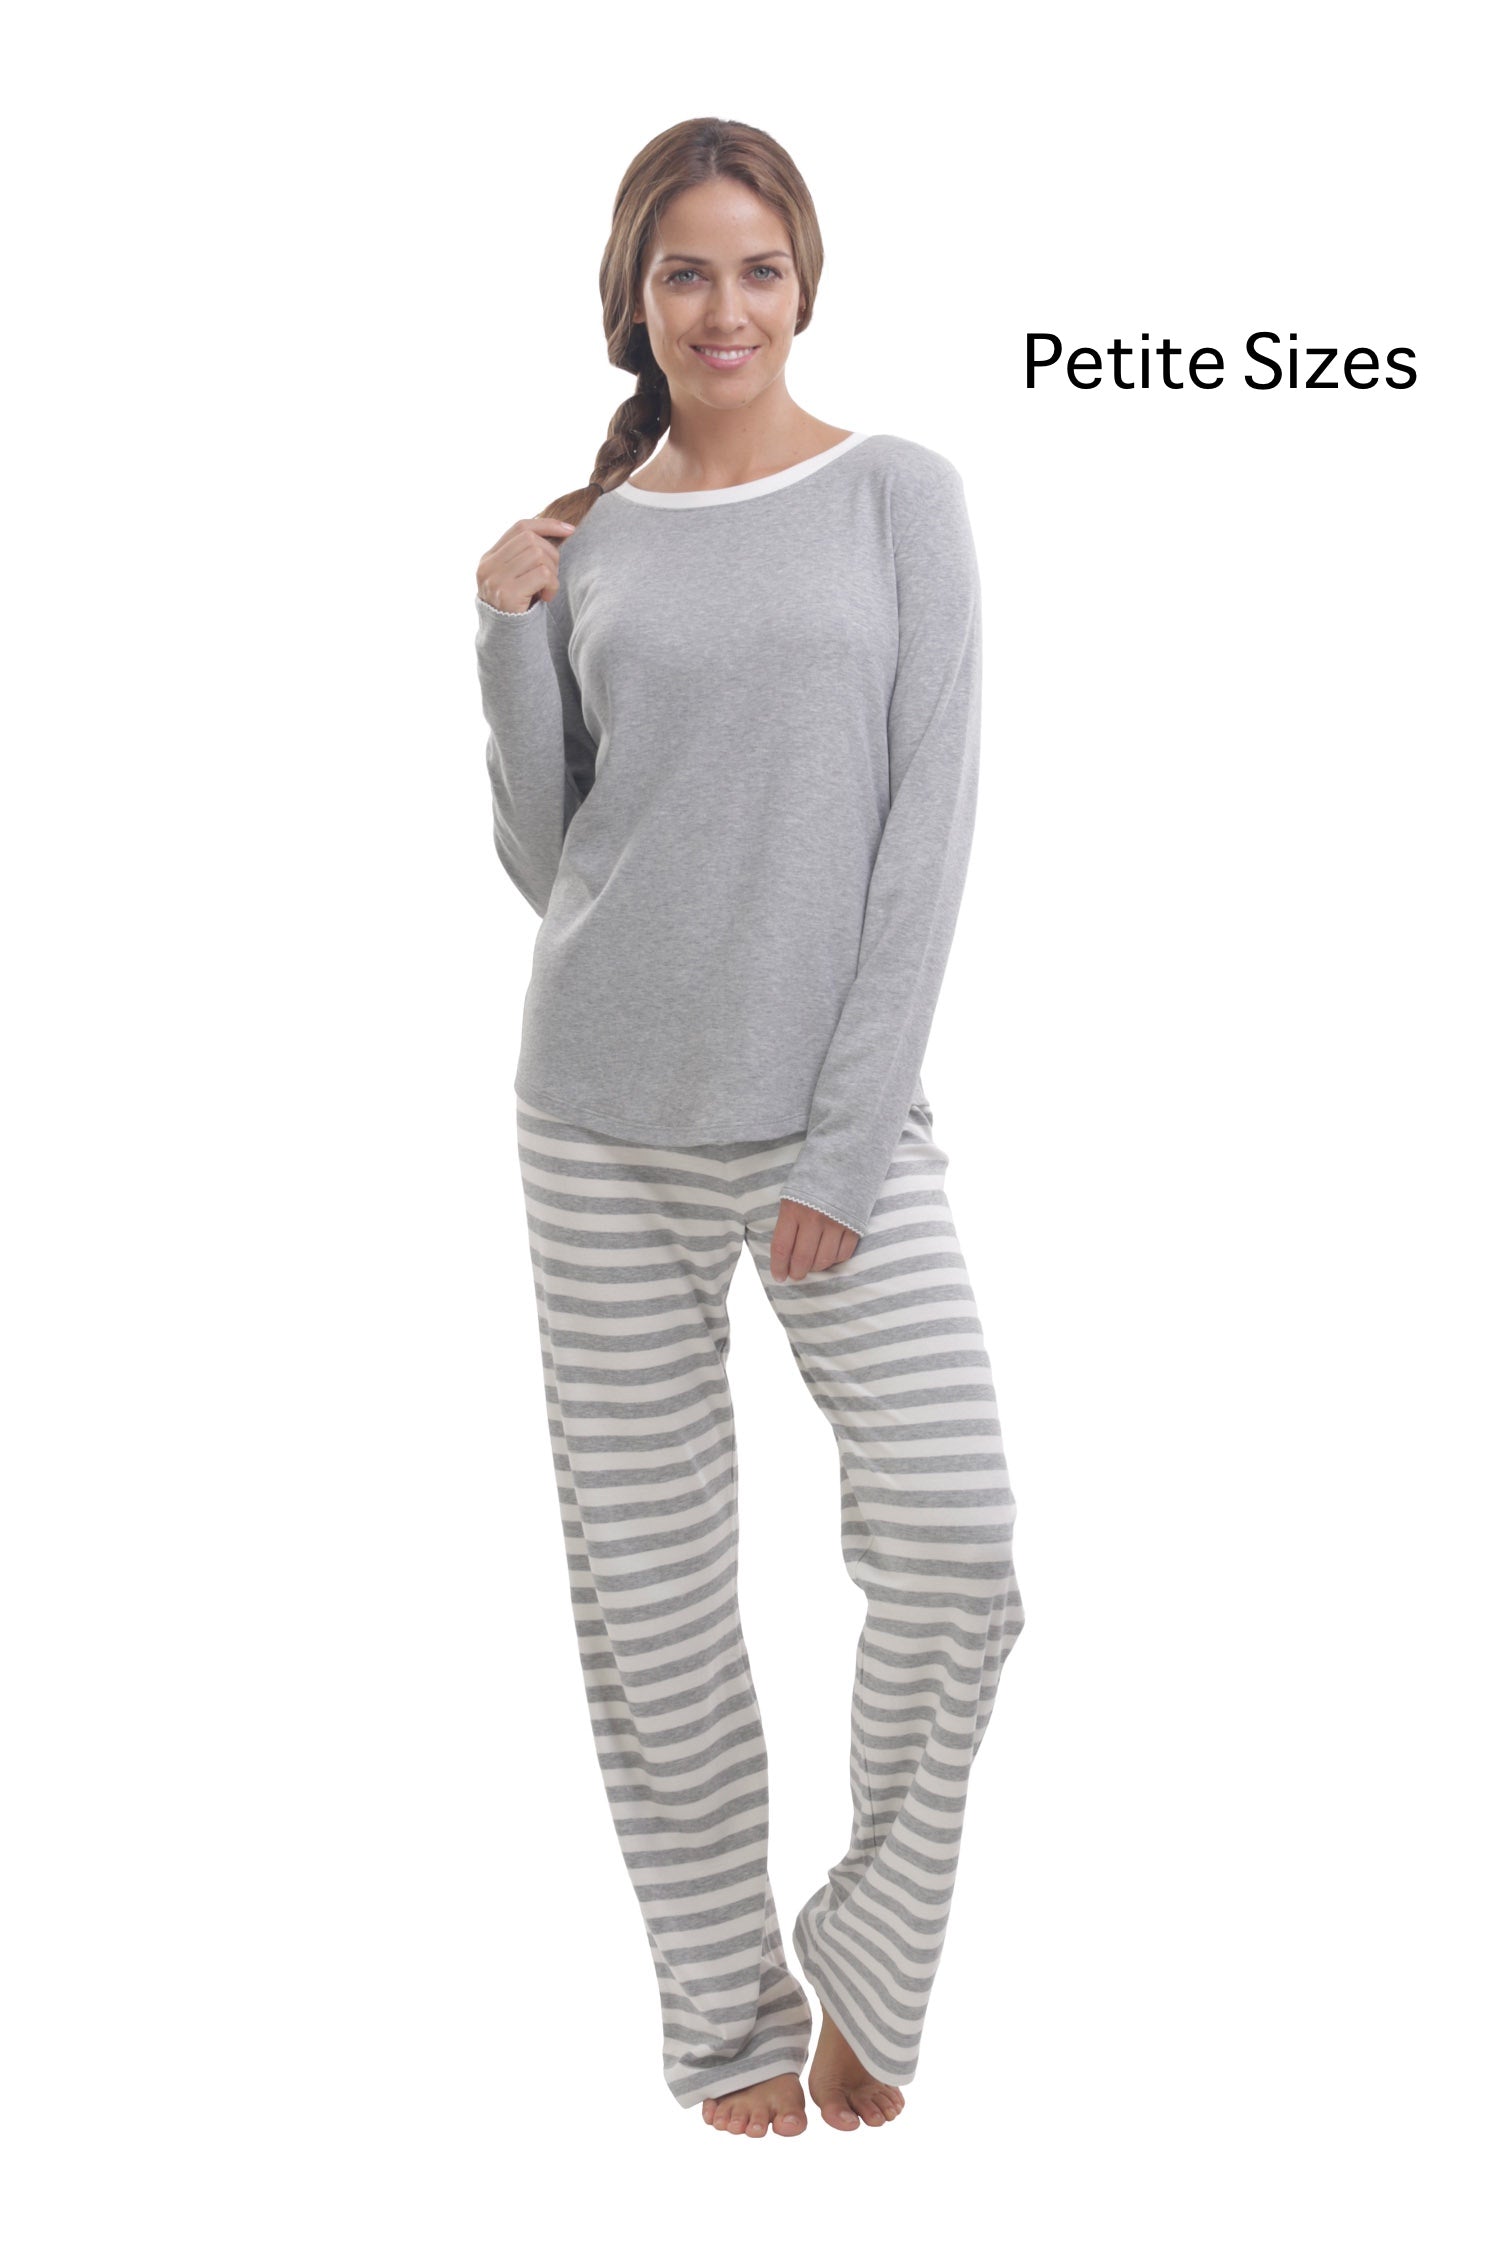 The Petite Soul Mate in Heather Grey (Large only)